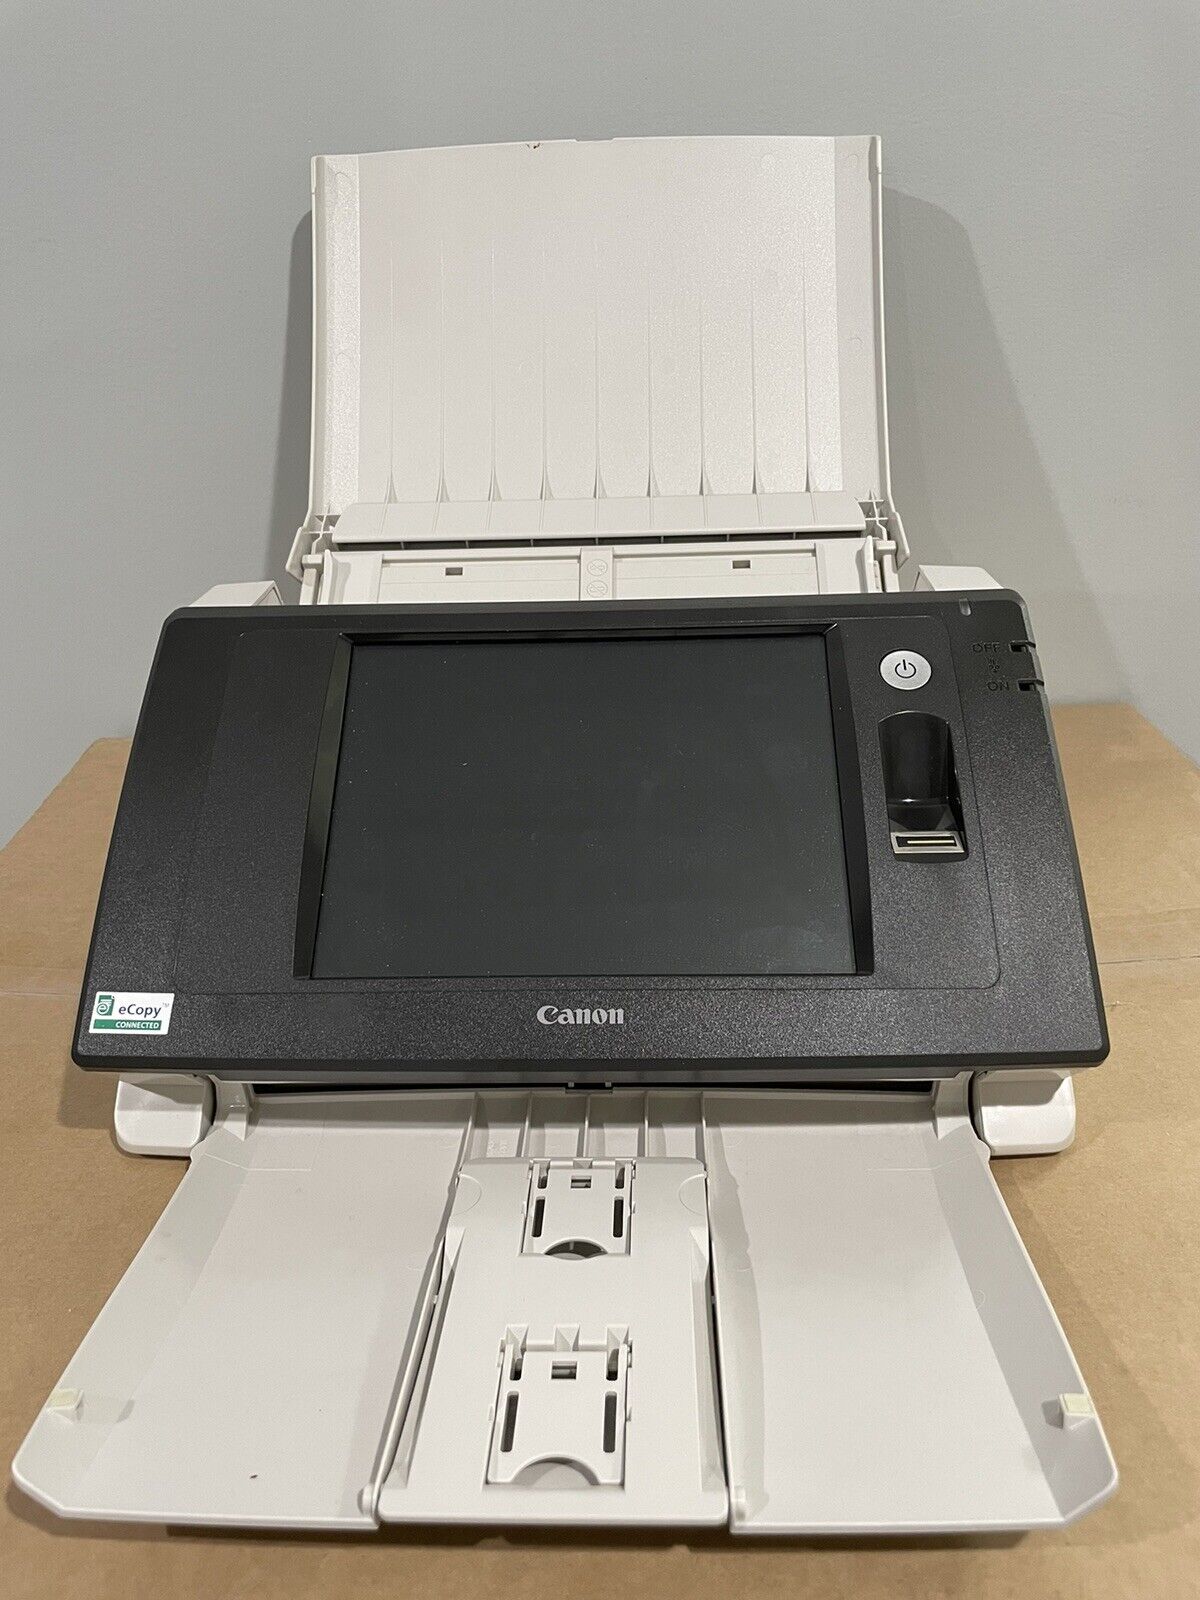 Canon imageFORMULA ScanFront 300eP Network Scanner Used Great Condition